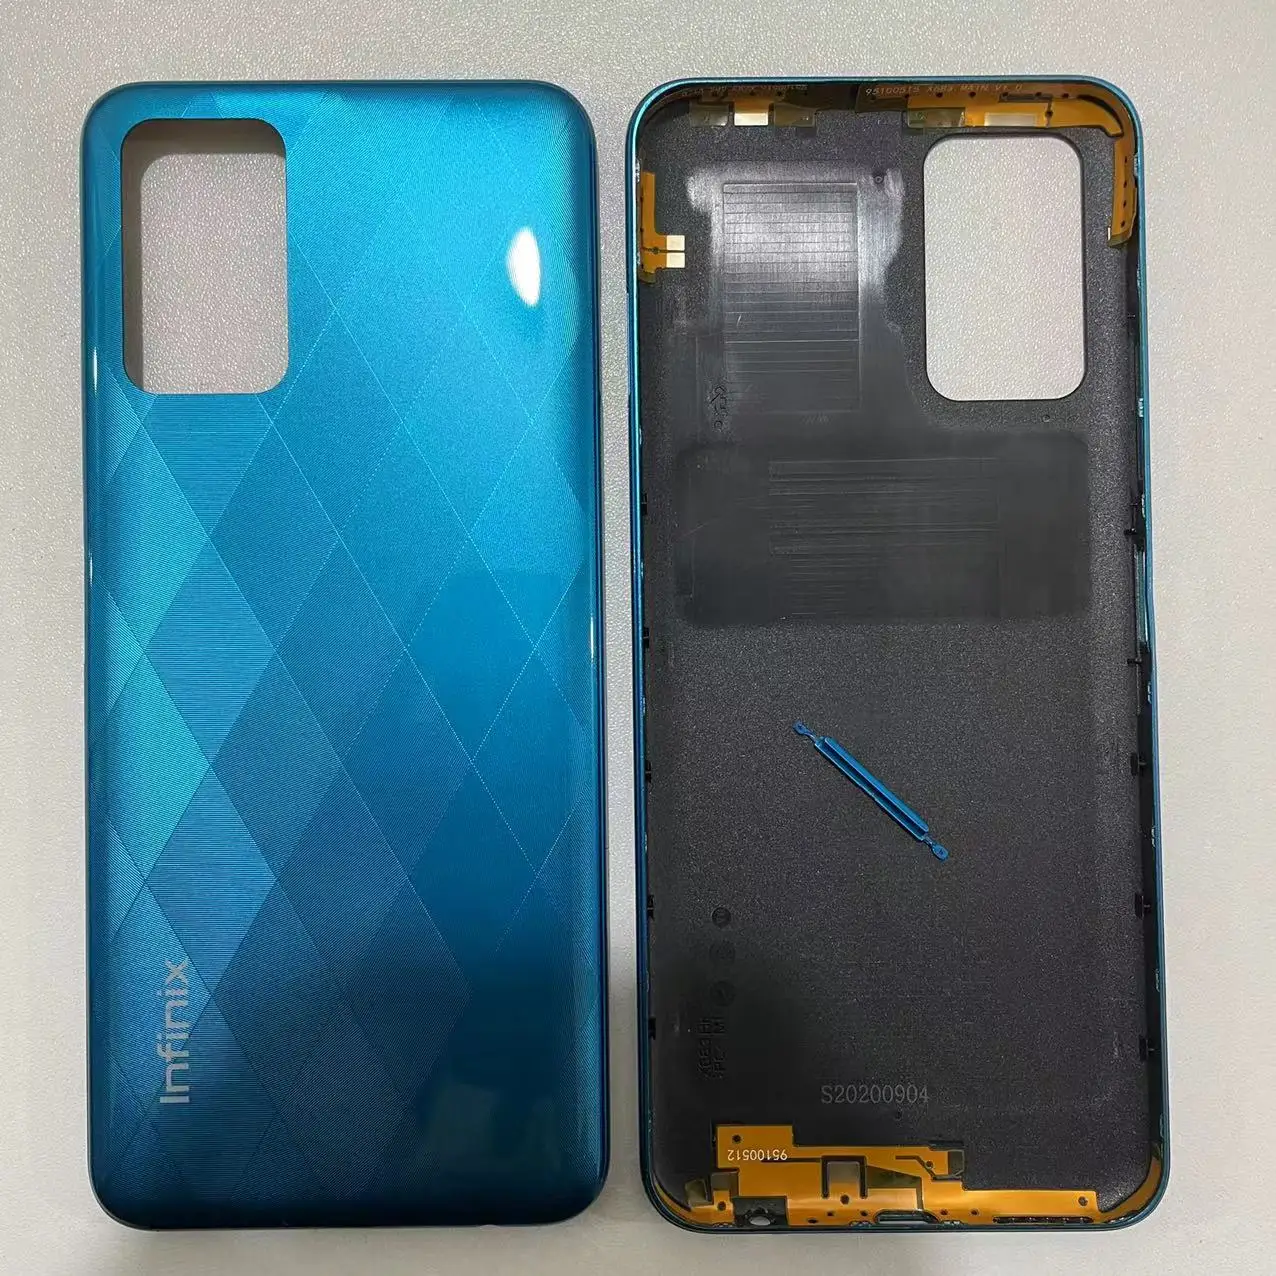 For Infinix Note 8i X683 X683B Back Battery Cover Rear Panel Door Housing Case Repair Parts